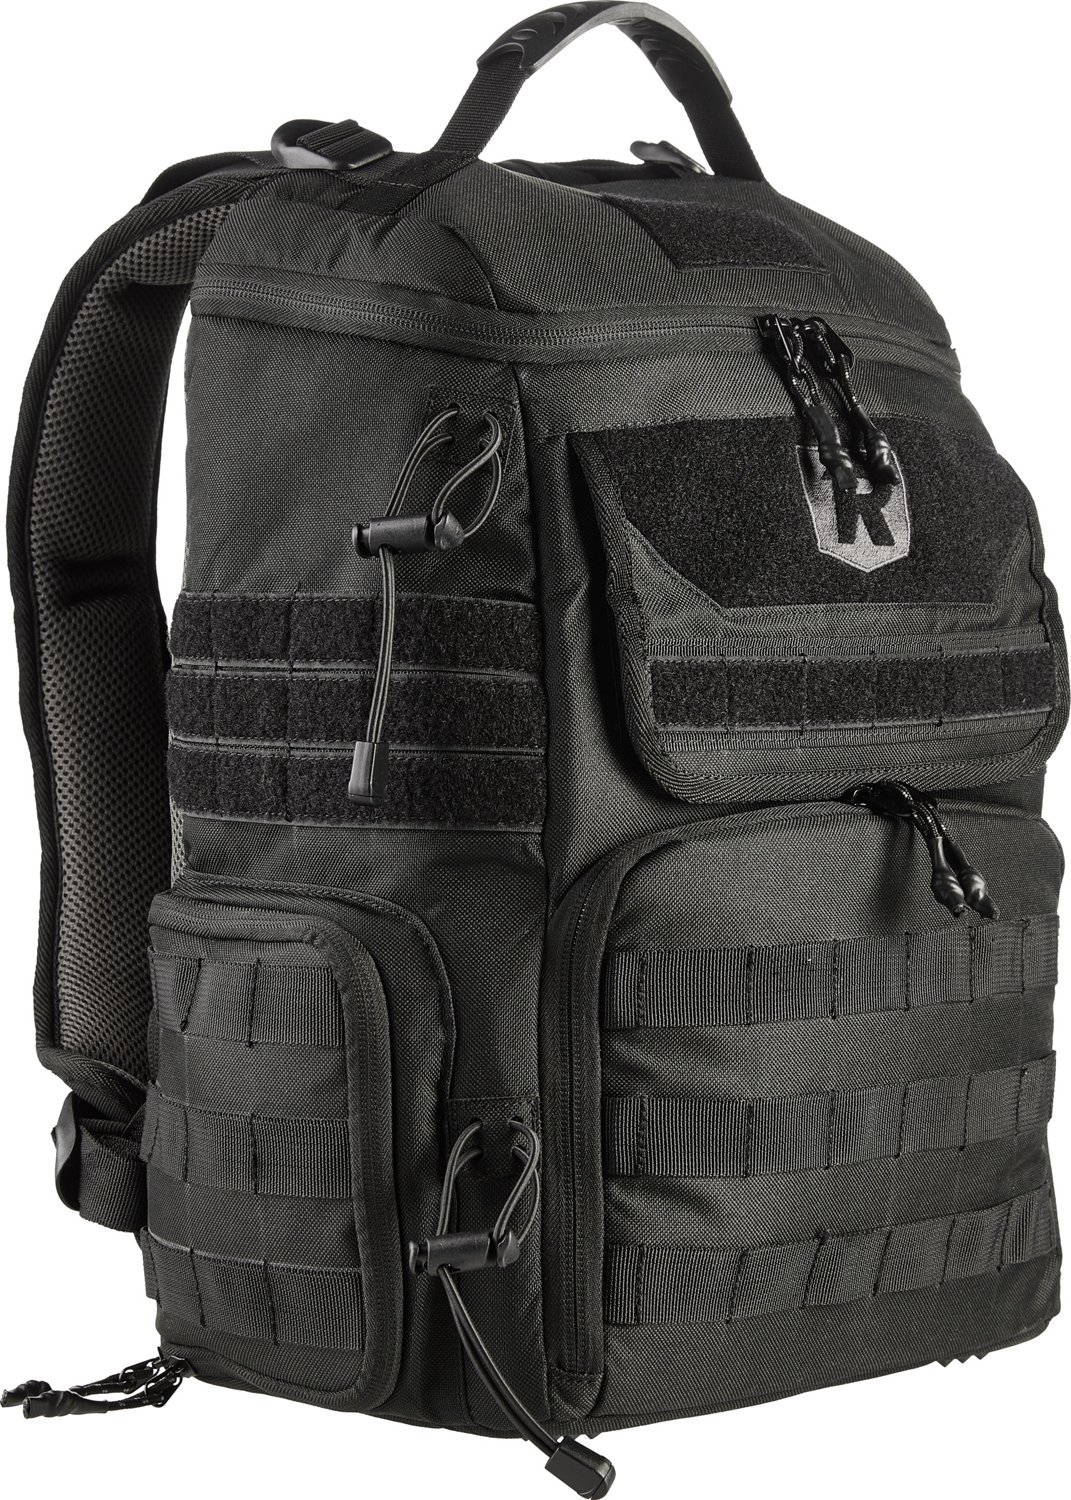 Redfield Range Backpack | Free Shipping at Academy